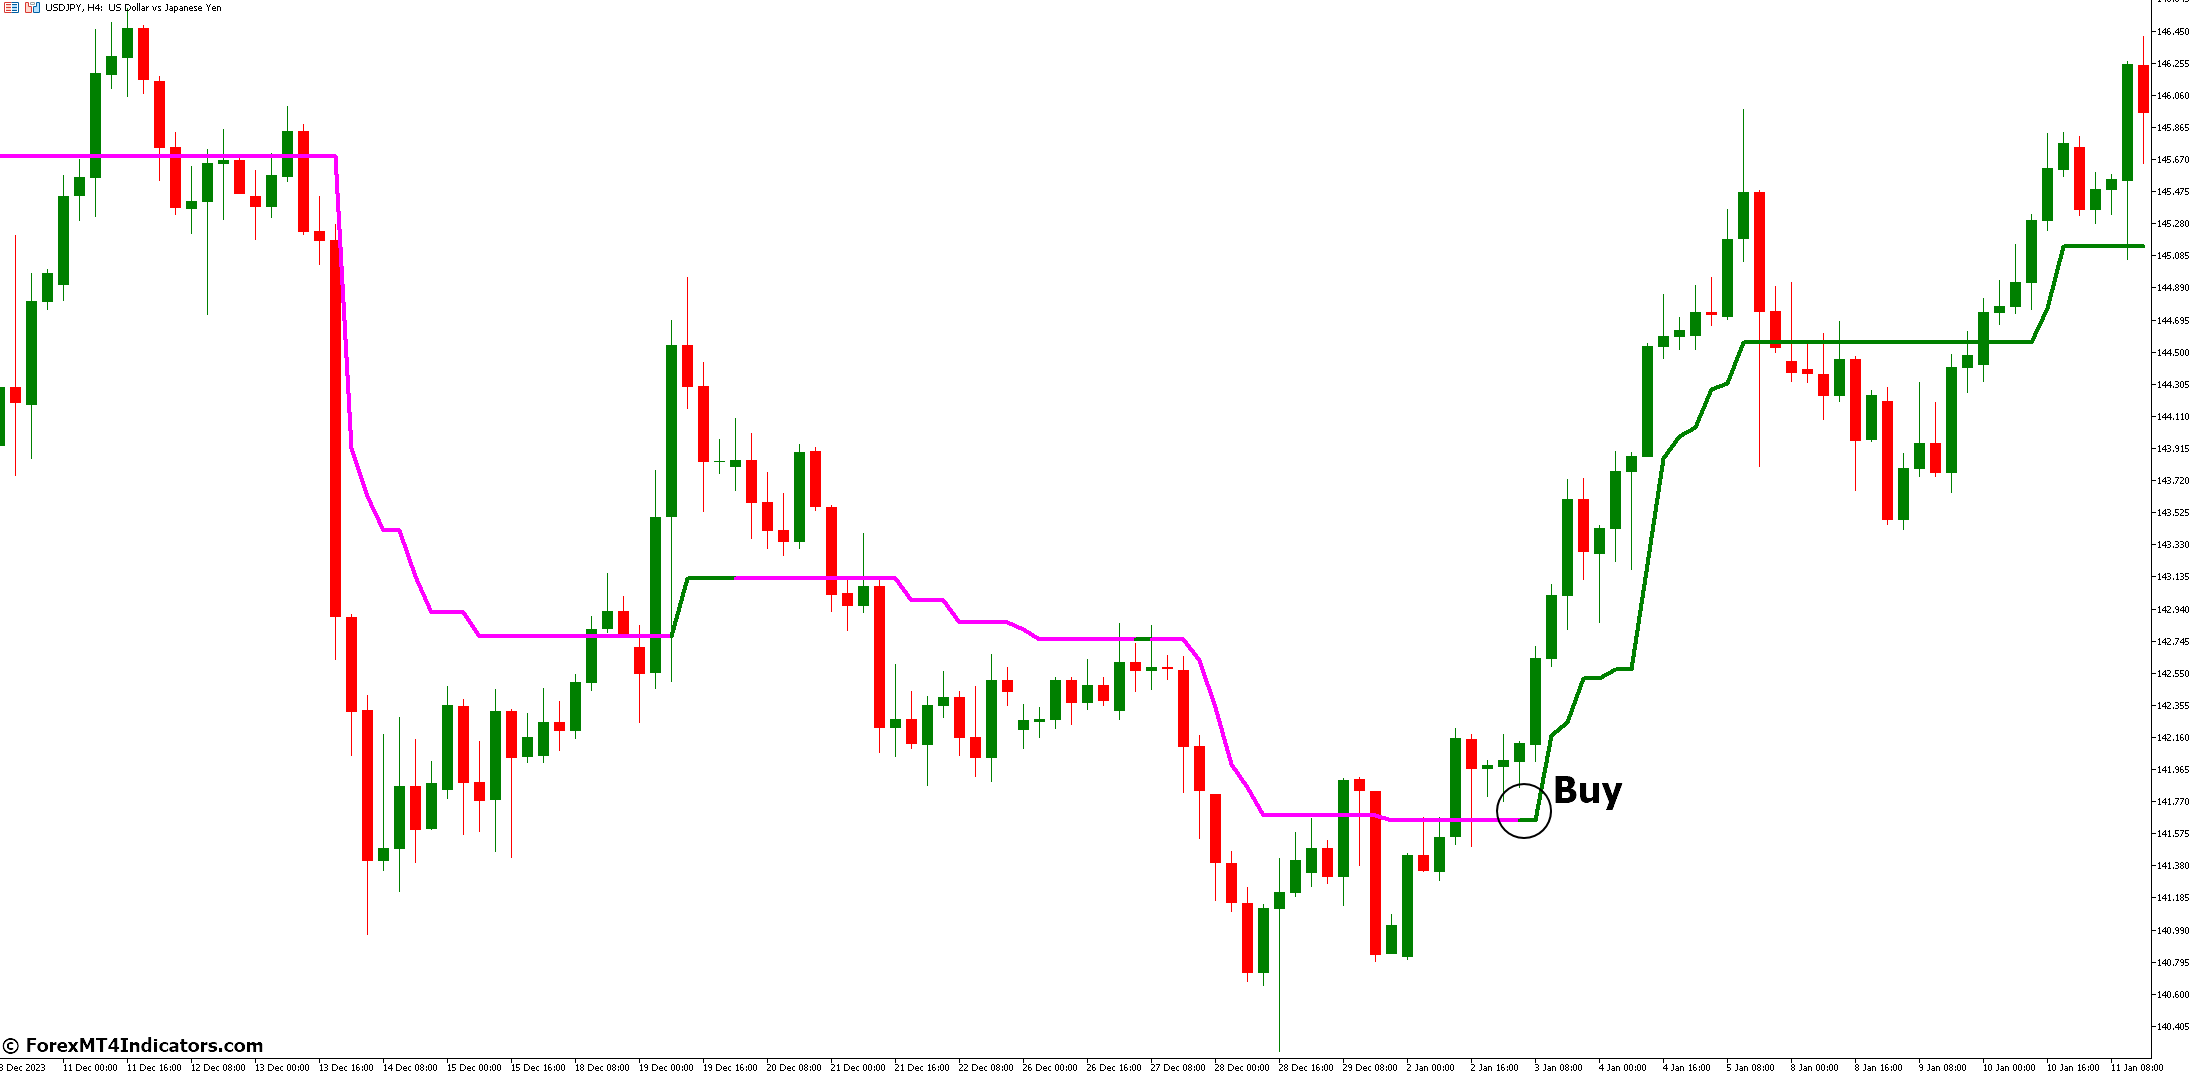 How to Trade with Trend Magic HTF Indicator - Buy Entry